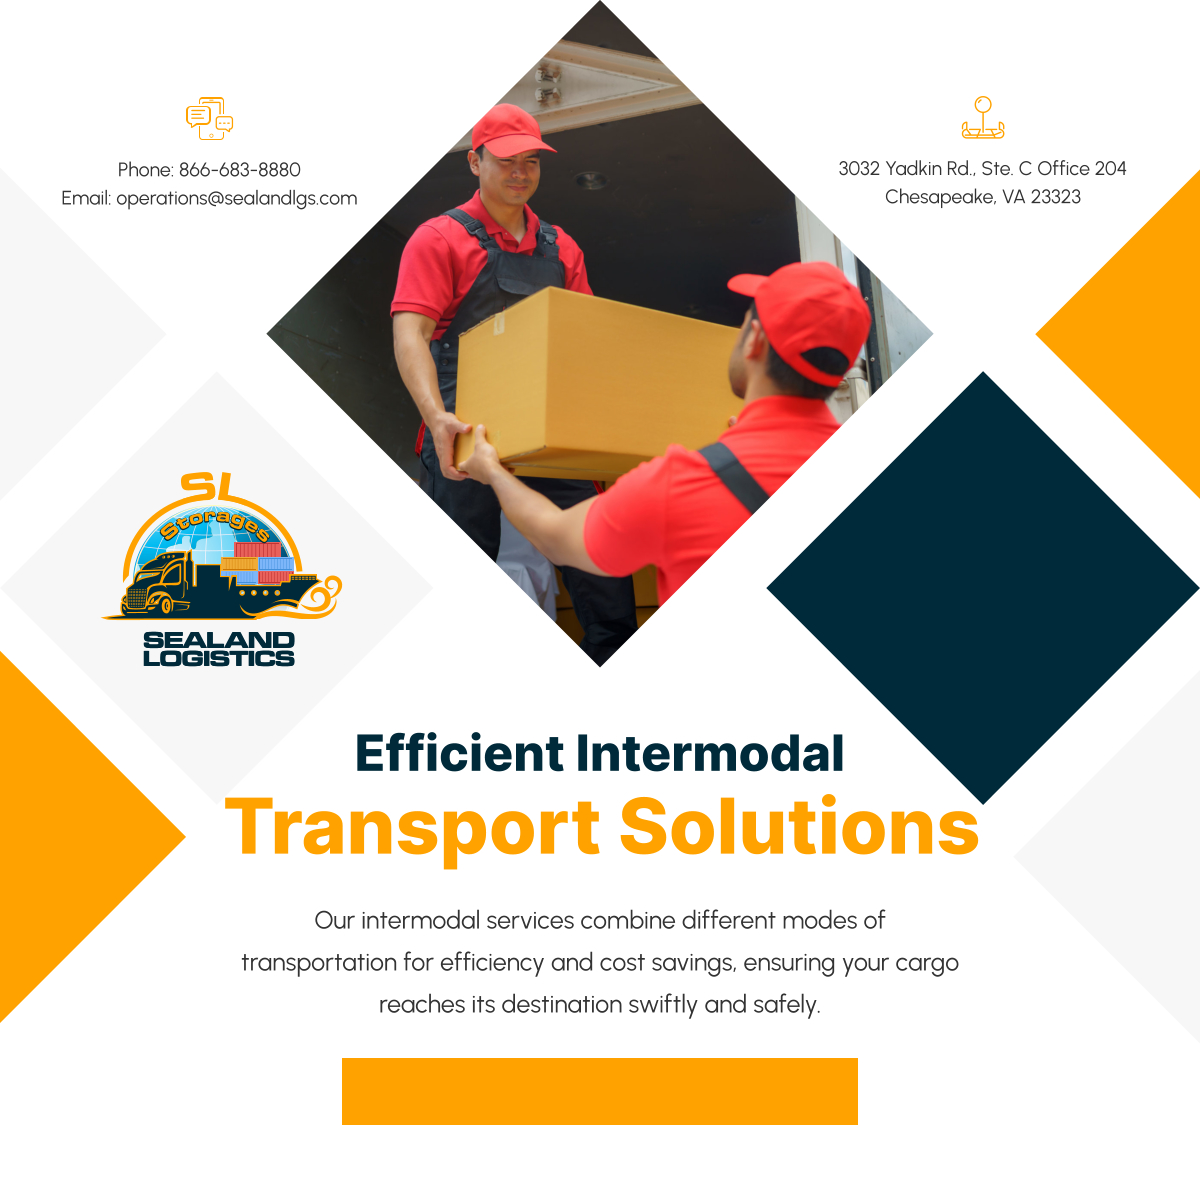 Experience the efficiency of intermodal transport with Sealand Logistics. Combining various modes, we ensure fast, secure delivery. Let's connect for your shipping needs.

#FreightServices #ChesapeakeVA #IntermodalTransport #SecureDelivery #FastDelivery